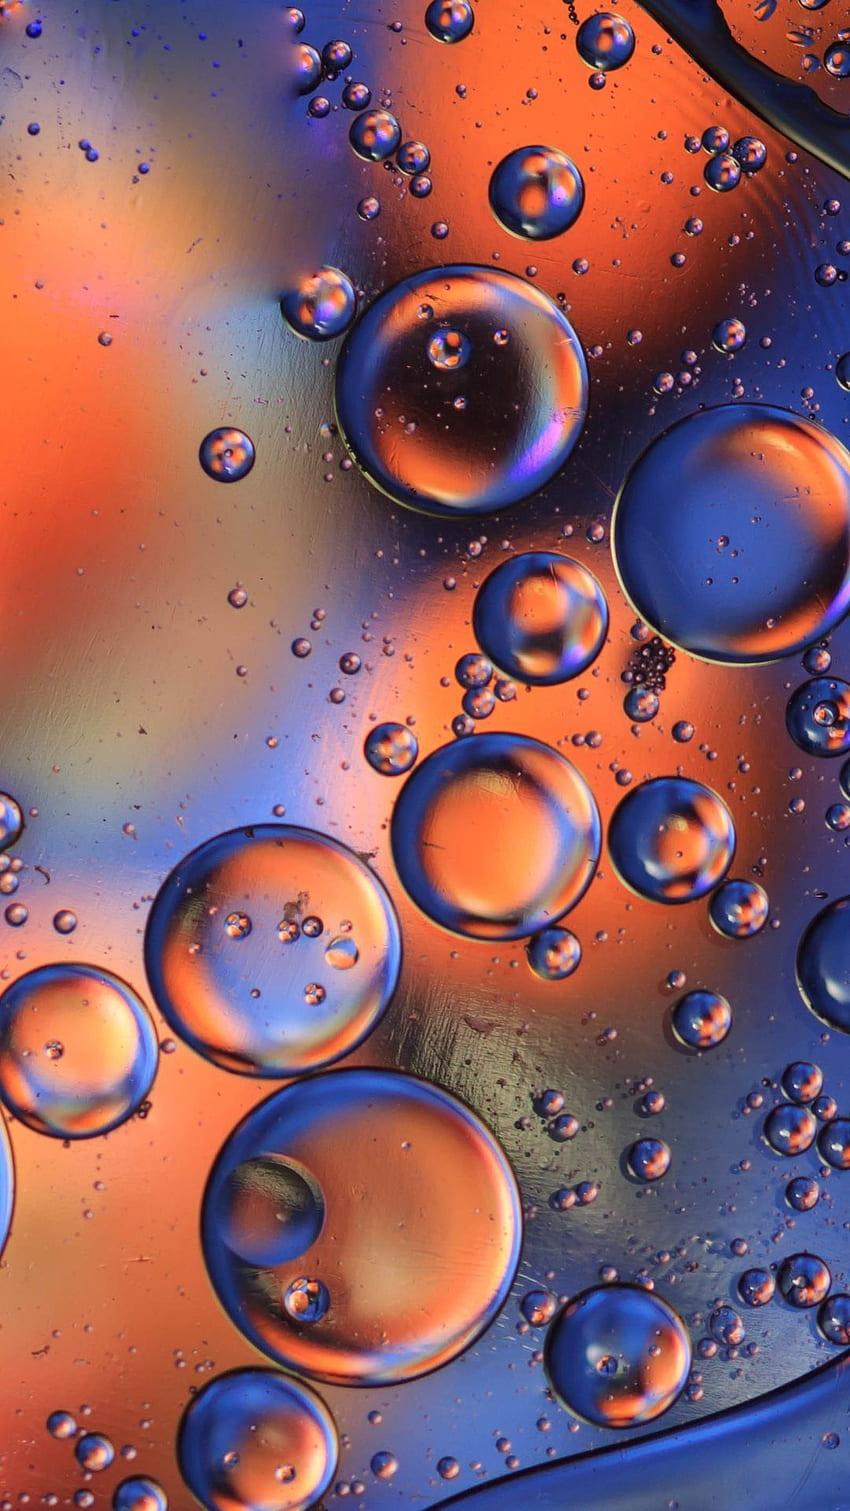 Share 63+ bubble wallpapers - in.cdgdbentre